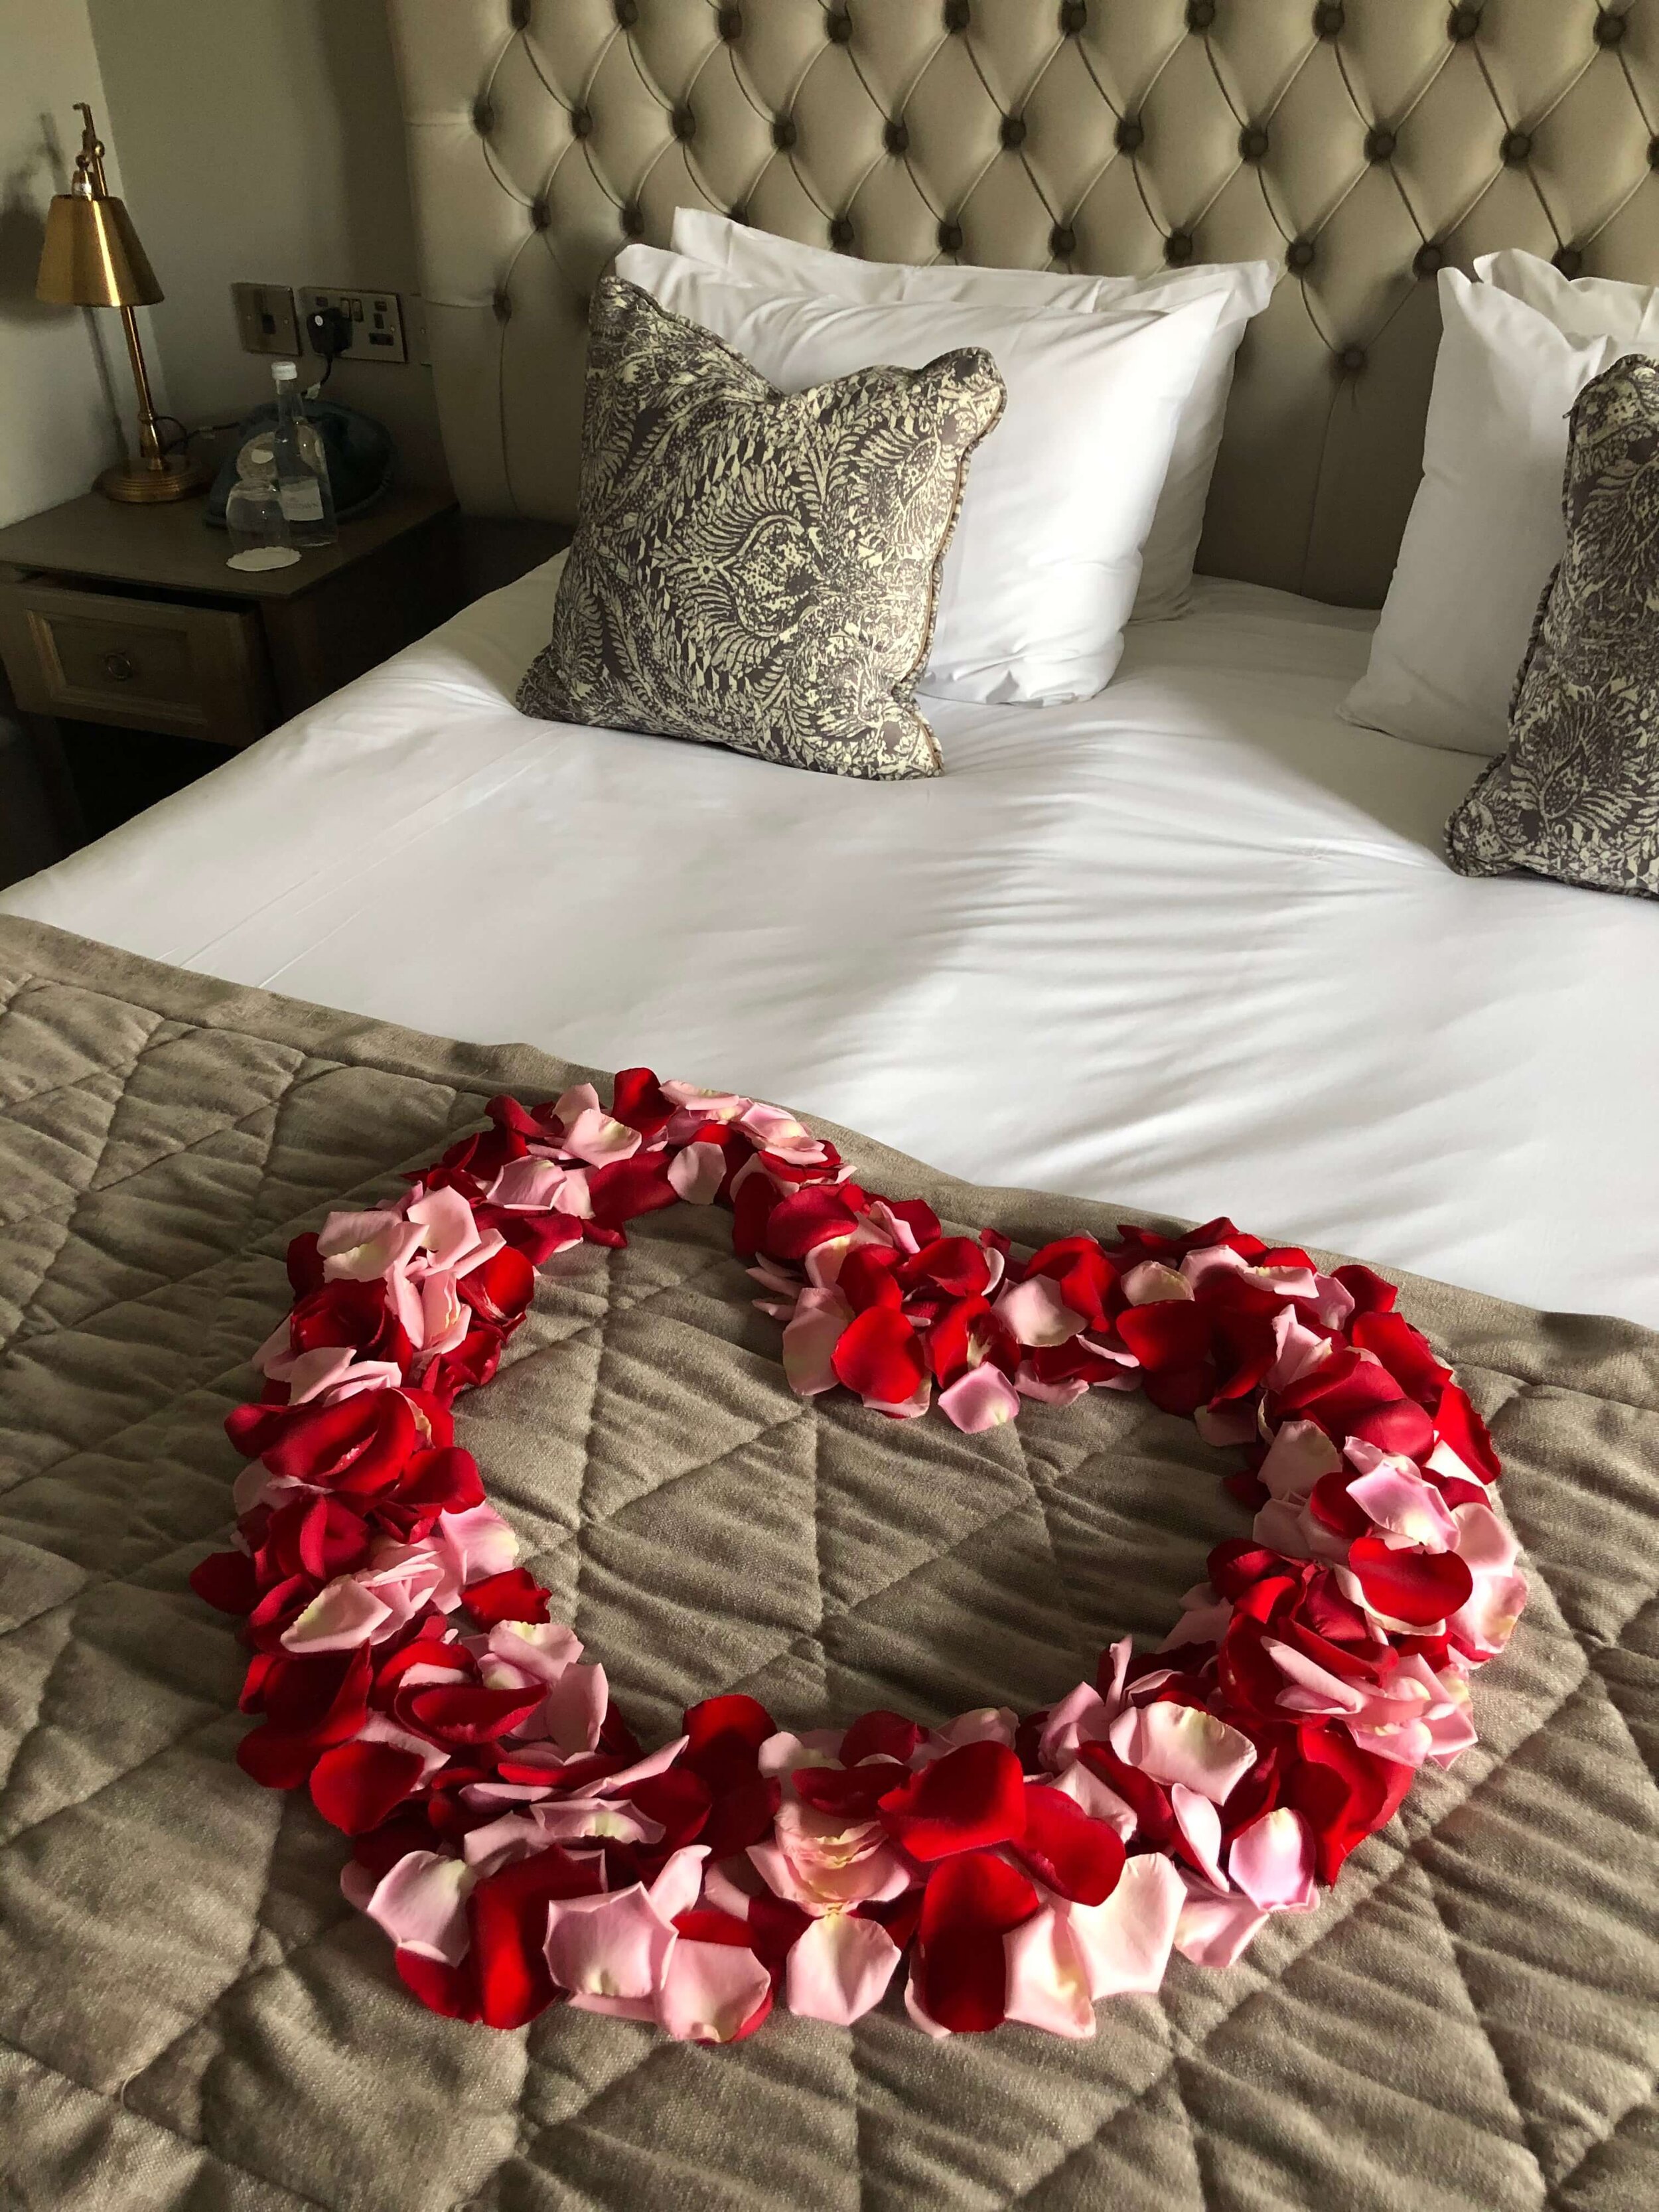 Rose Petal heart on bed for proposal at hotel